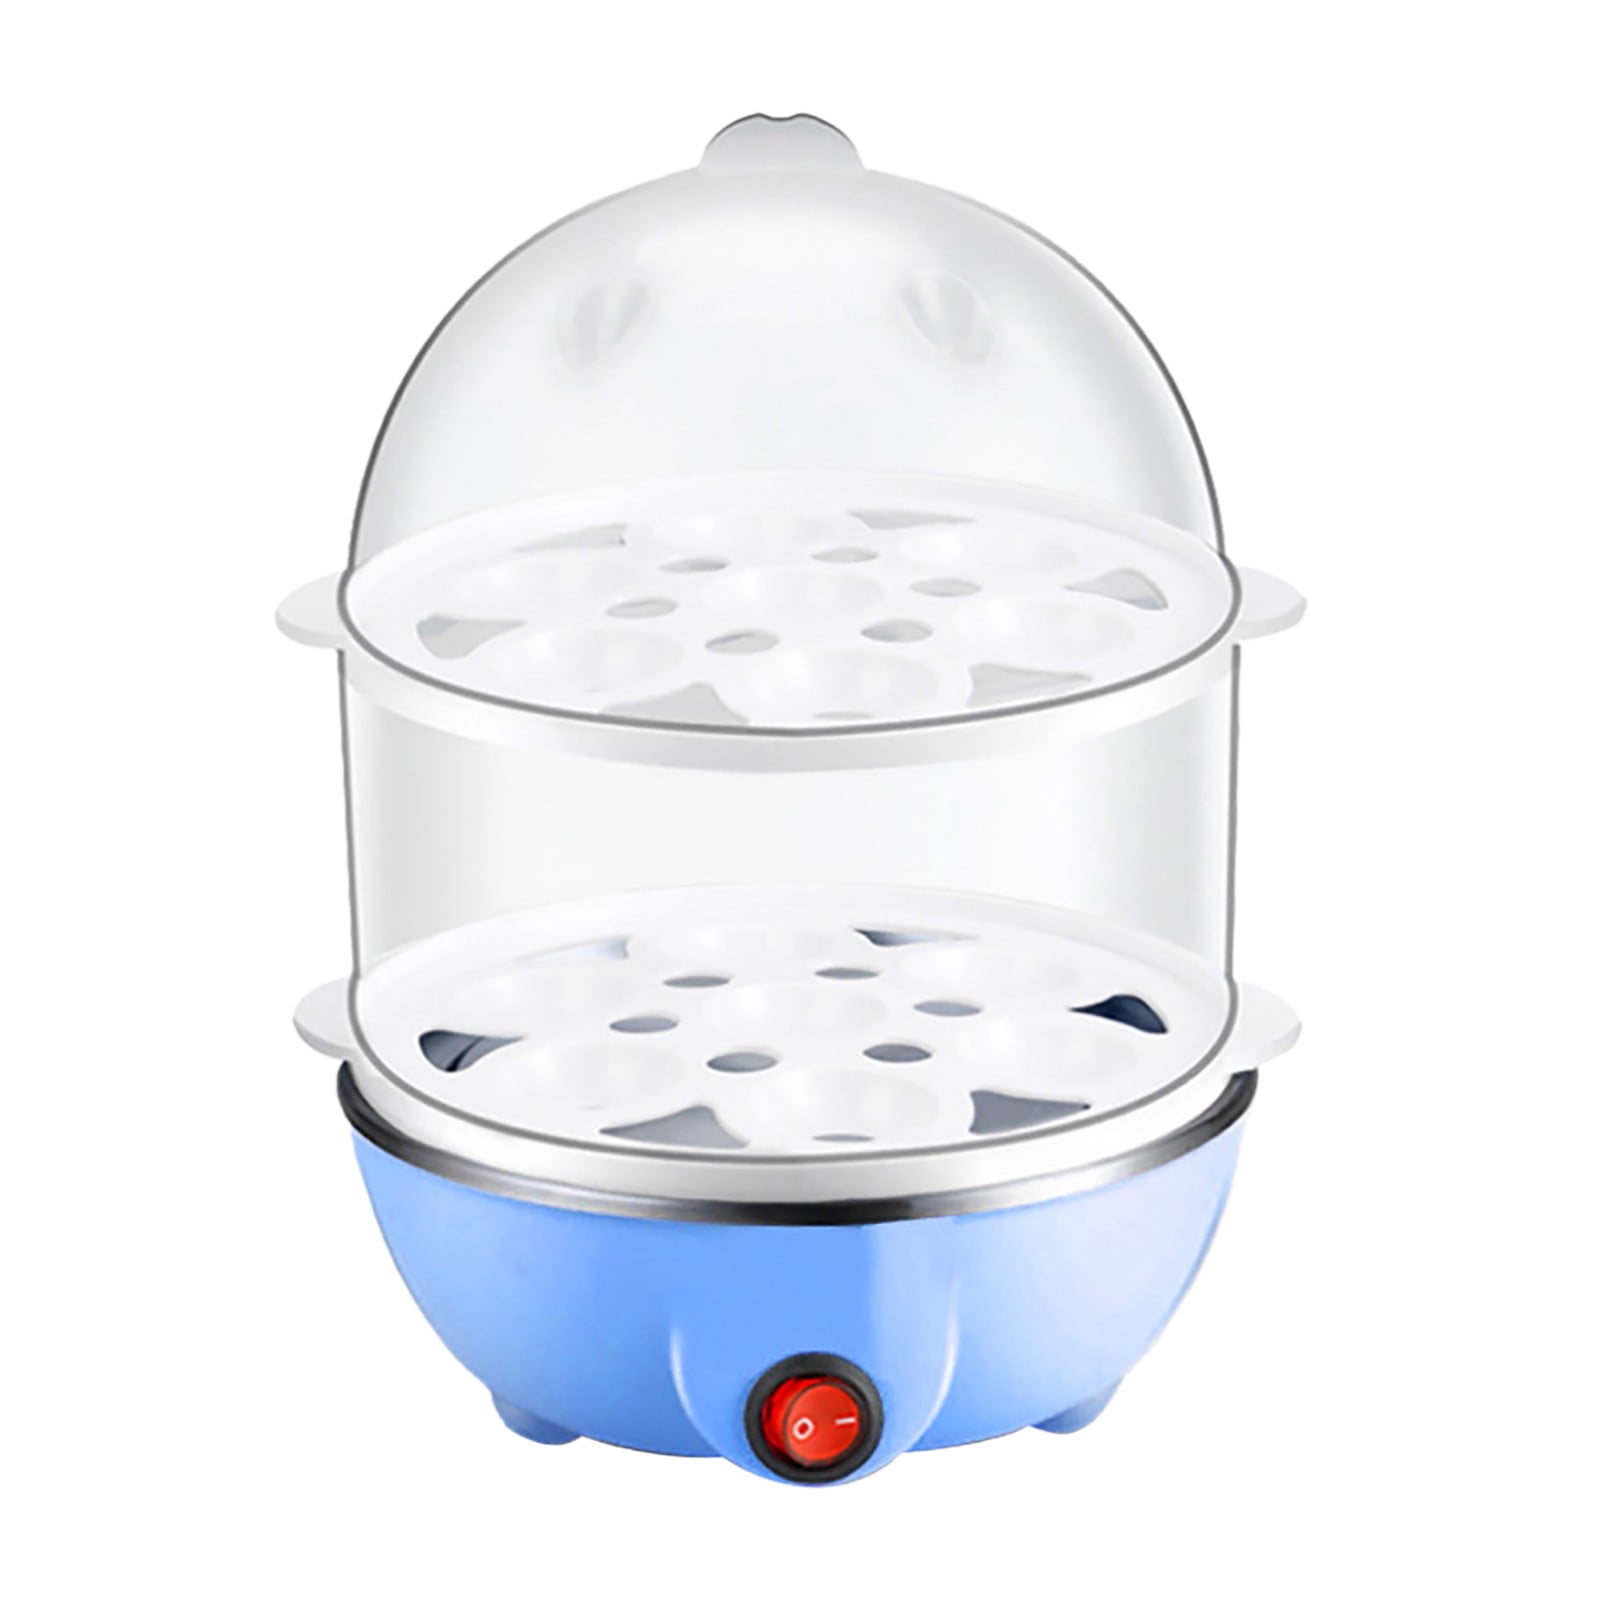 AQwzh Rapid Egg Cooker Electric for Hard Boiled, Poached, Scrambled Eggs,  Omelets, Steamed Vegetables, Seafood, Dumplings, 7 capacity, with Auto Shut  Off Feature 